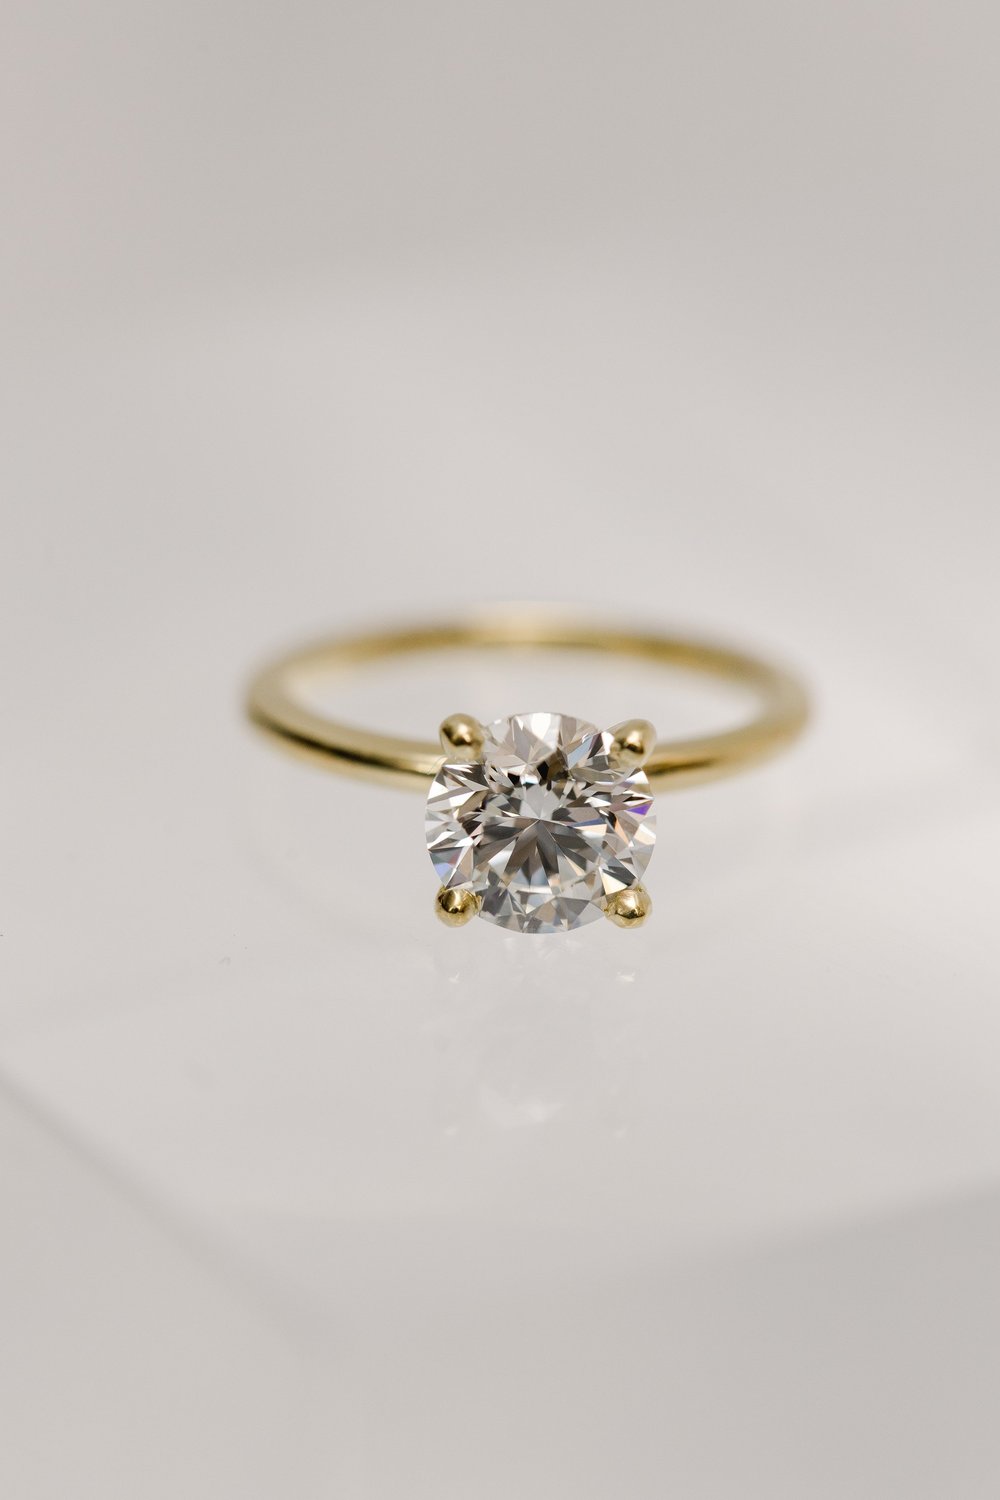 custom designed brilliant cut solitaire diamond engagement ring in four prong yellow gold setting made by Alexandria &amp; Company in Old Town Alexandria